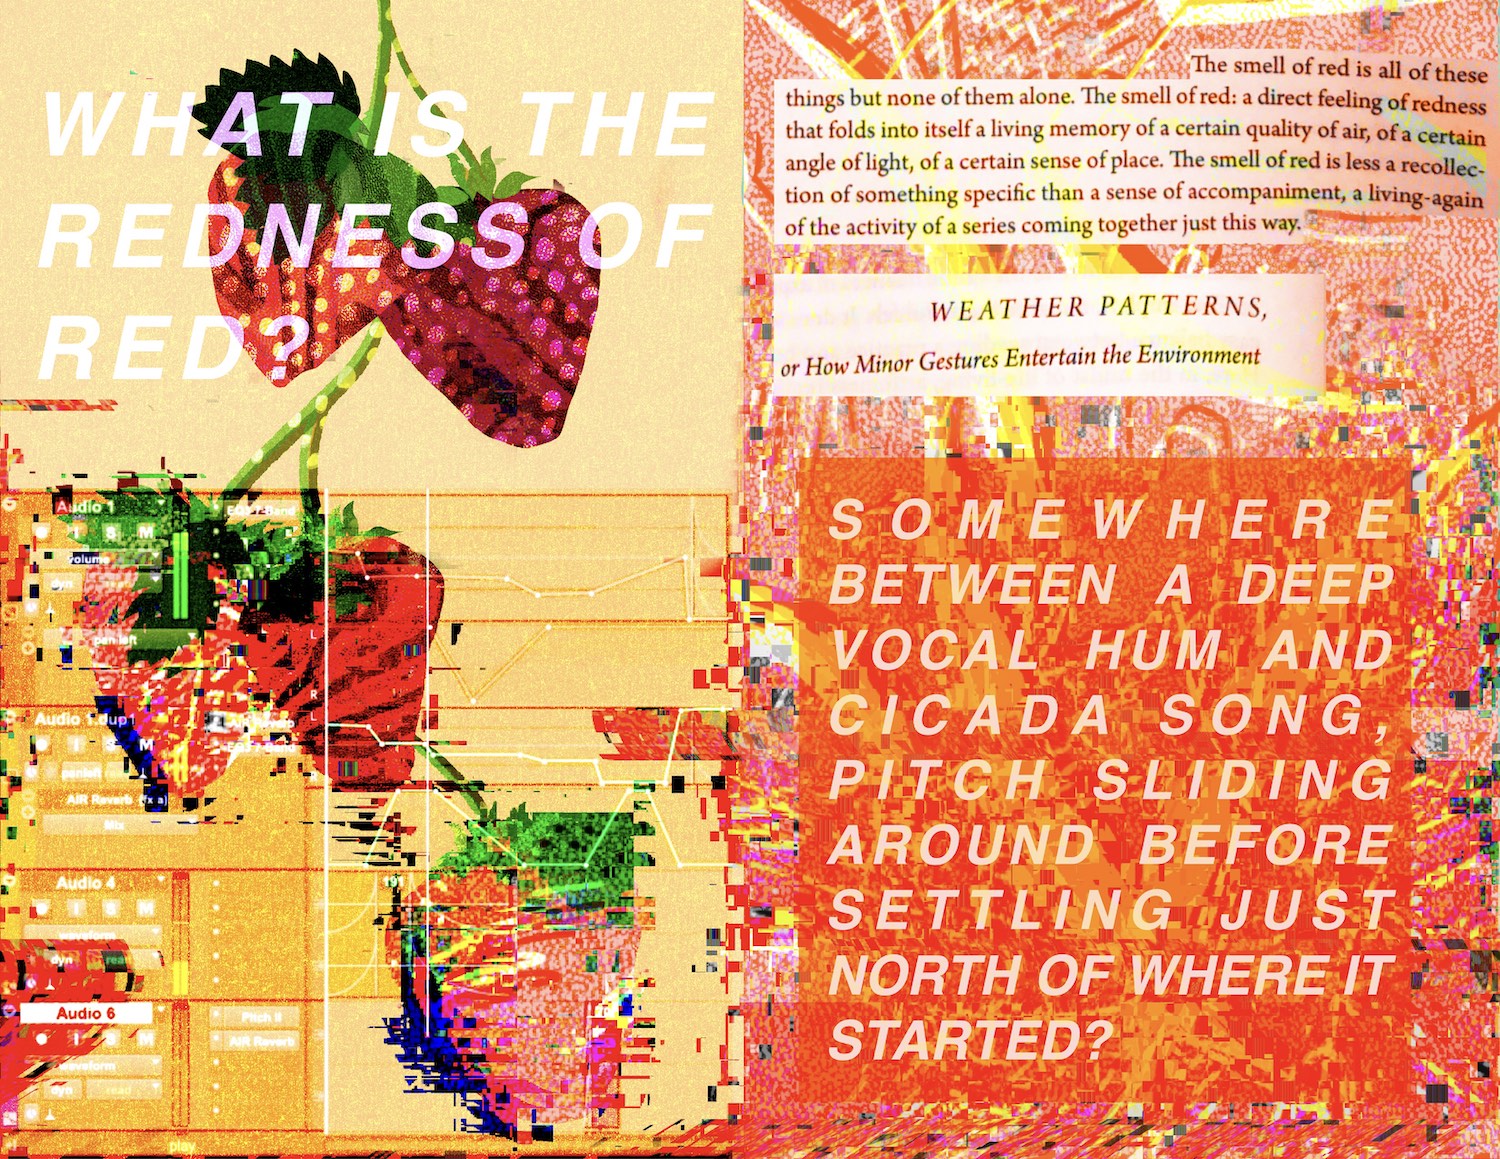 The second panel of Ariana Martinez’s Not Just a Cut echoes some of the colours and shapes of the first, as the yellow crescents and vibrating markings swirl into the right hand side of the image. On the left we see an image of two strawberries. White text placed over the top asks, what is the redness of red? A further three strawberries are growing out from this top image but as they sink towards the bottom of the image they have become distorted, as if rendered through digital glitches, disappearing into pixels. Over these strawberries we can see the faint imprint of audio editing software. The names of tracks are visible, as are some sharp lines to mark out the decisions in a mix, which appear like a ghostly constellation. In the top right of the image as see a quote which has been cut out from a book. It reads, The smell of red is all of these things but none of them alone. The smell of red: a direct feeling of redness that folds into itself a living memory of a certain quality of air, of a certain angle of light, of a certain sense of place. The smell of red is less a recollection of something specific than a sense of accompaniment, a living-again of the activity of a series coming together just this way. The title of the text is pasted below the quote, Weather Patterns, or How Minor Gestures Entertain the Environment. The right hand side of the image is also dissolving into digital glitches, squares of colour break apart the yellow crescents and red dots to form a noisy, vivid burst of background colour. Over this, white text reads, Somewhere between a deep vocal hum and cicada song, pitch sliding around before settling, just north of where it started?